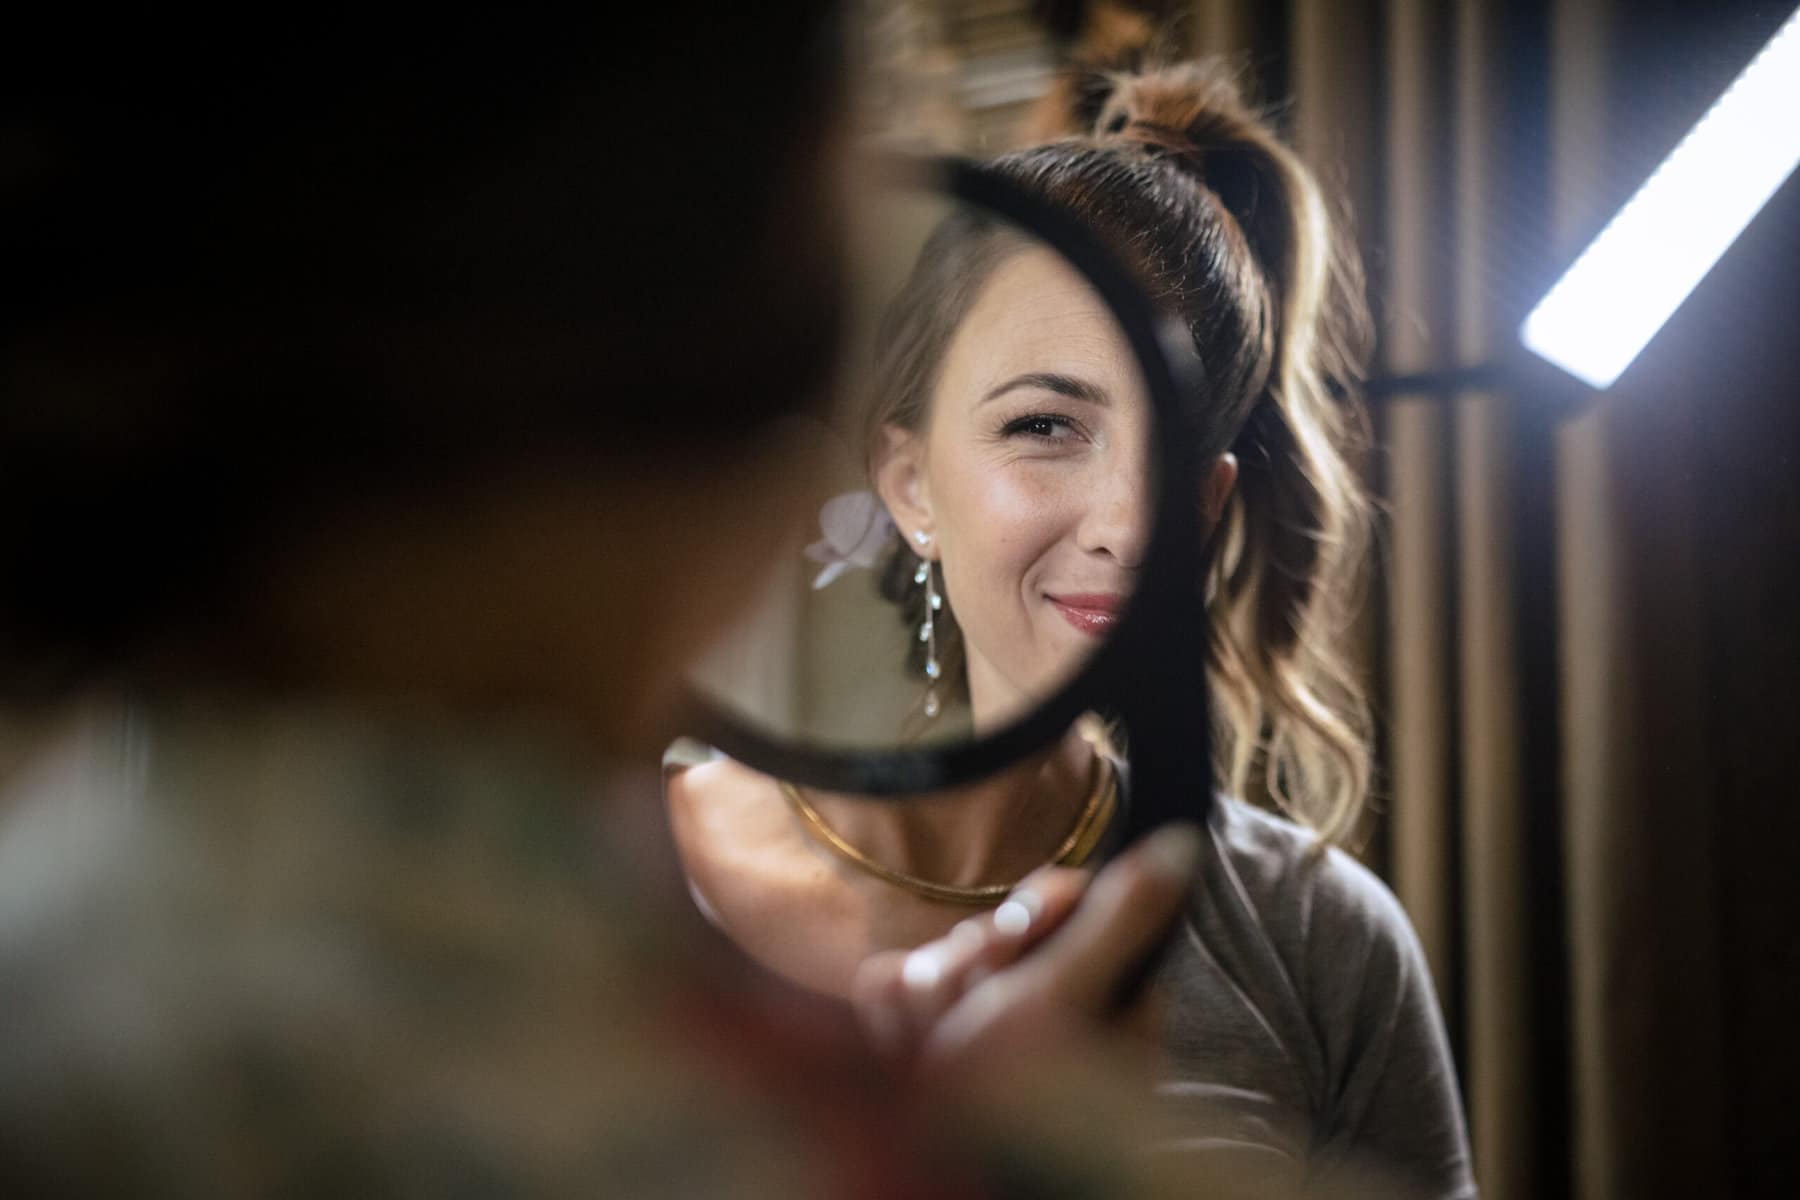 A woman looking at herself in a mirror.